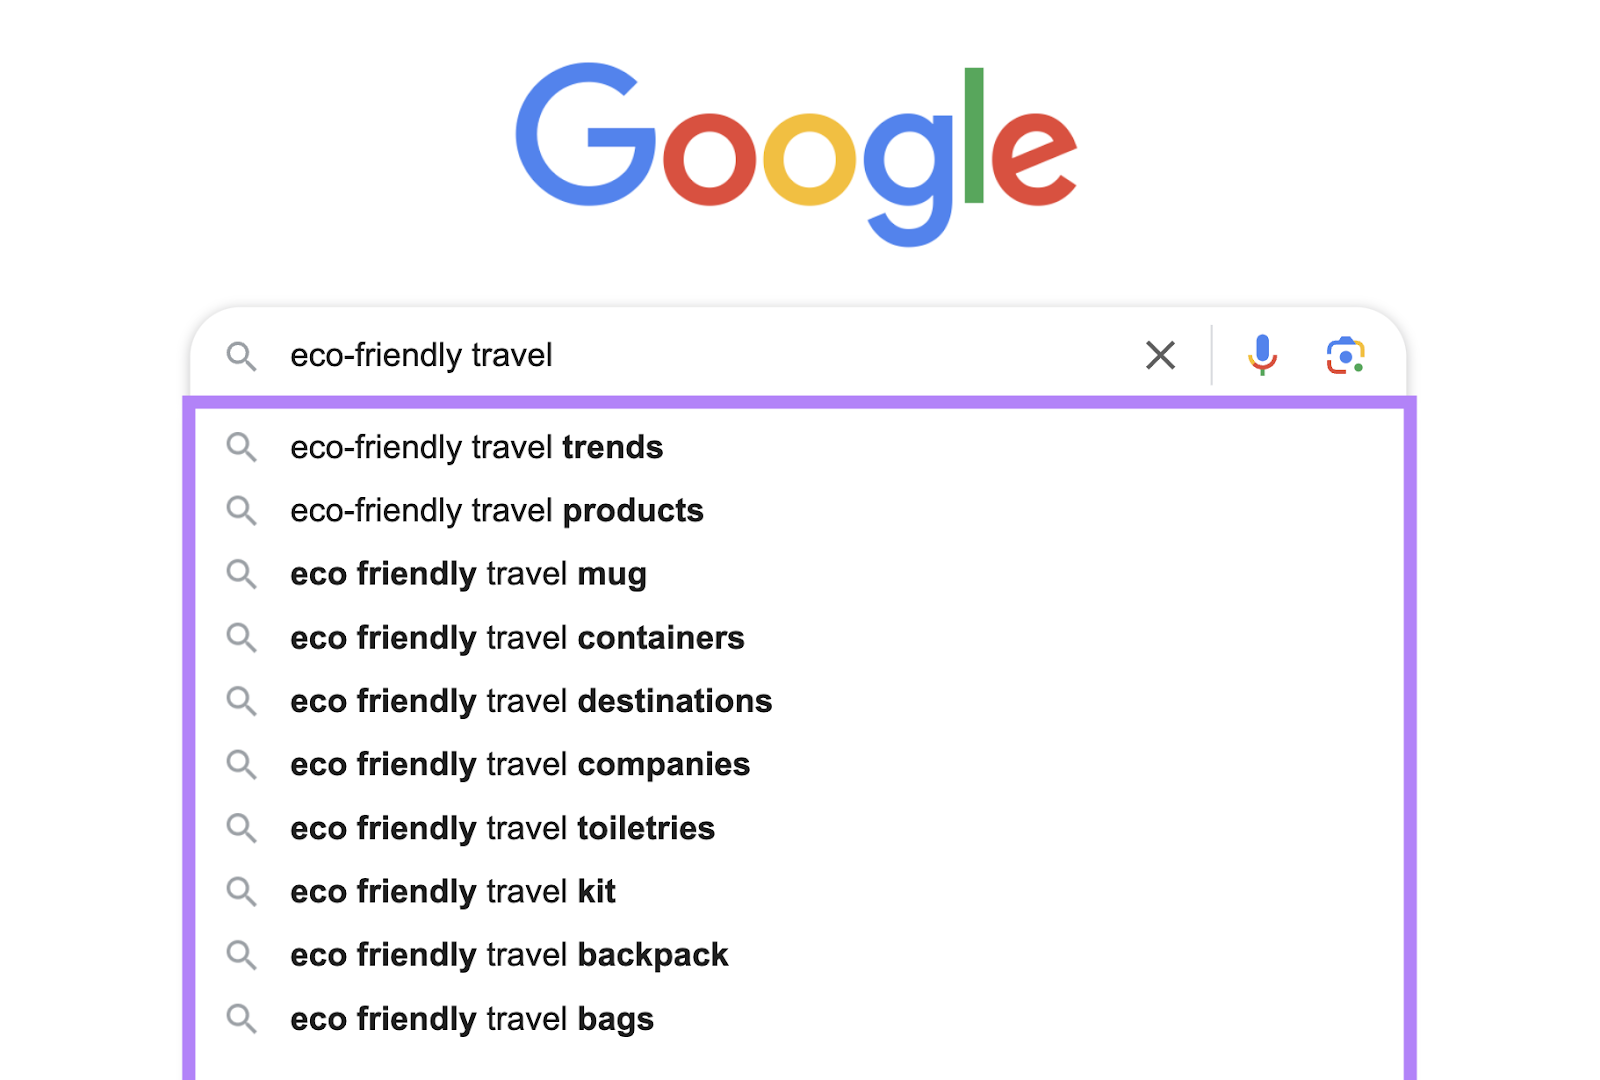 Google search interface with "eco-friendly travel" entered in the search bar and suggested searches below.